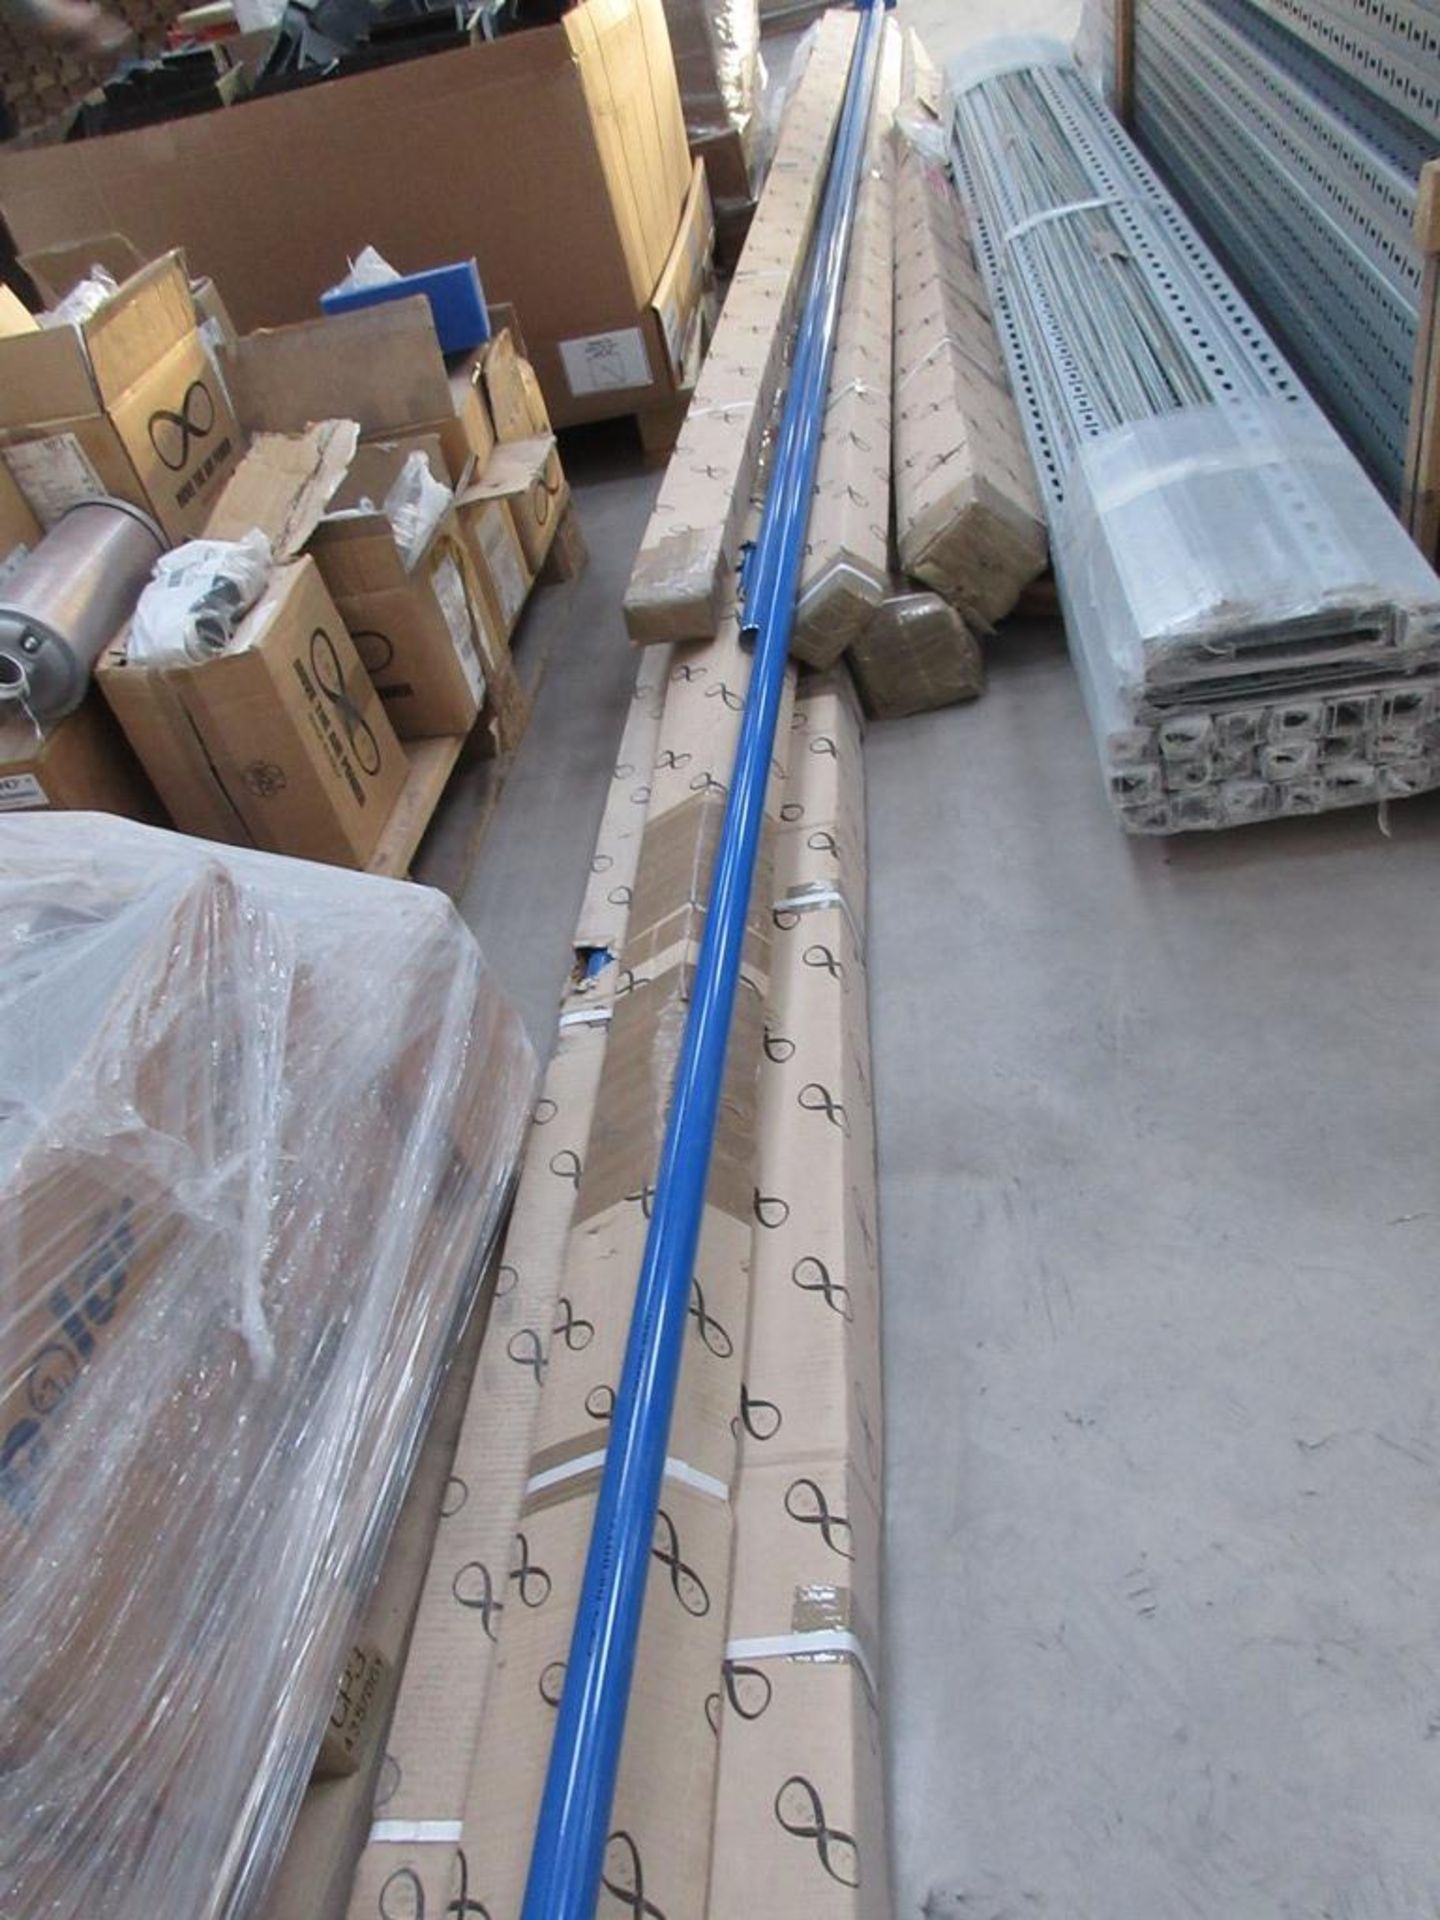 Seven boxes of Infinity steel tubing - Image 6 of 7